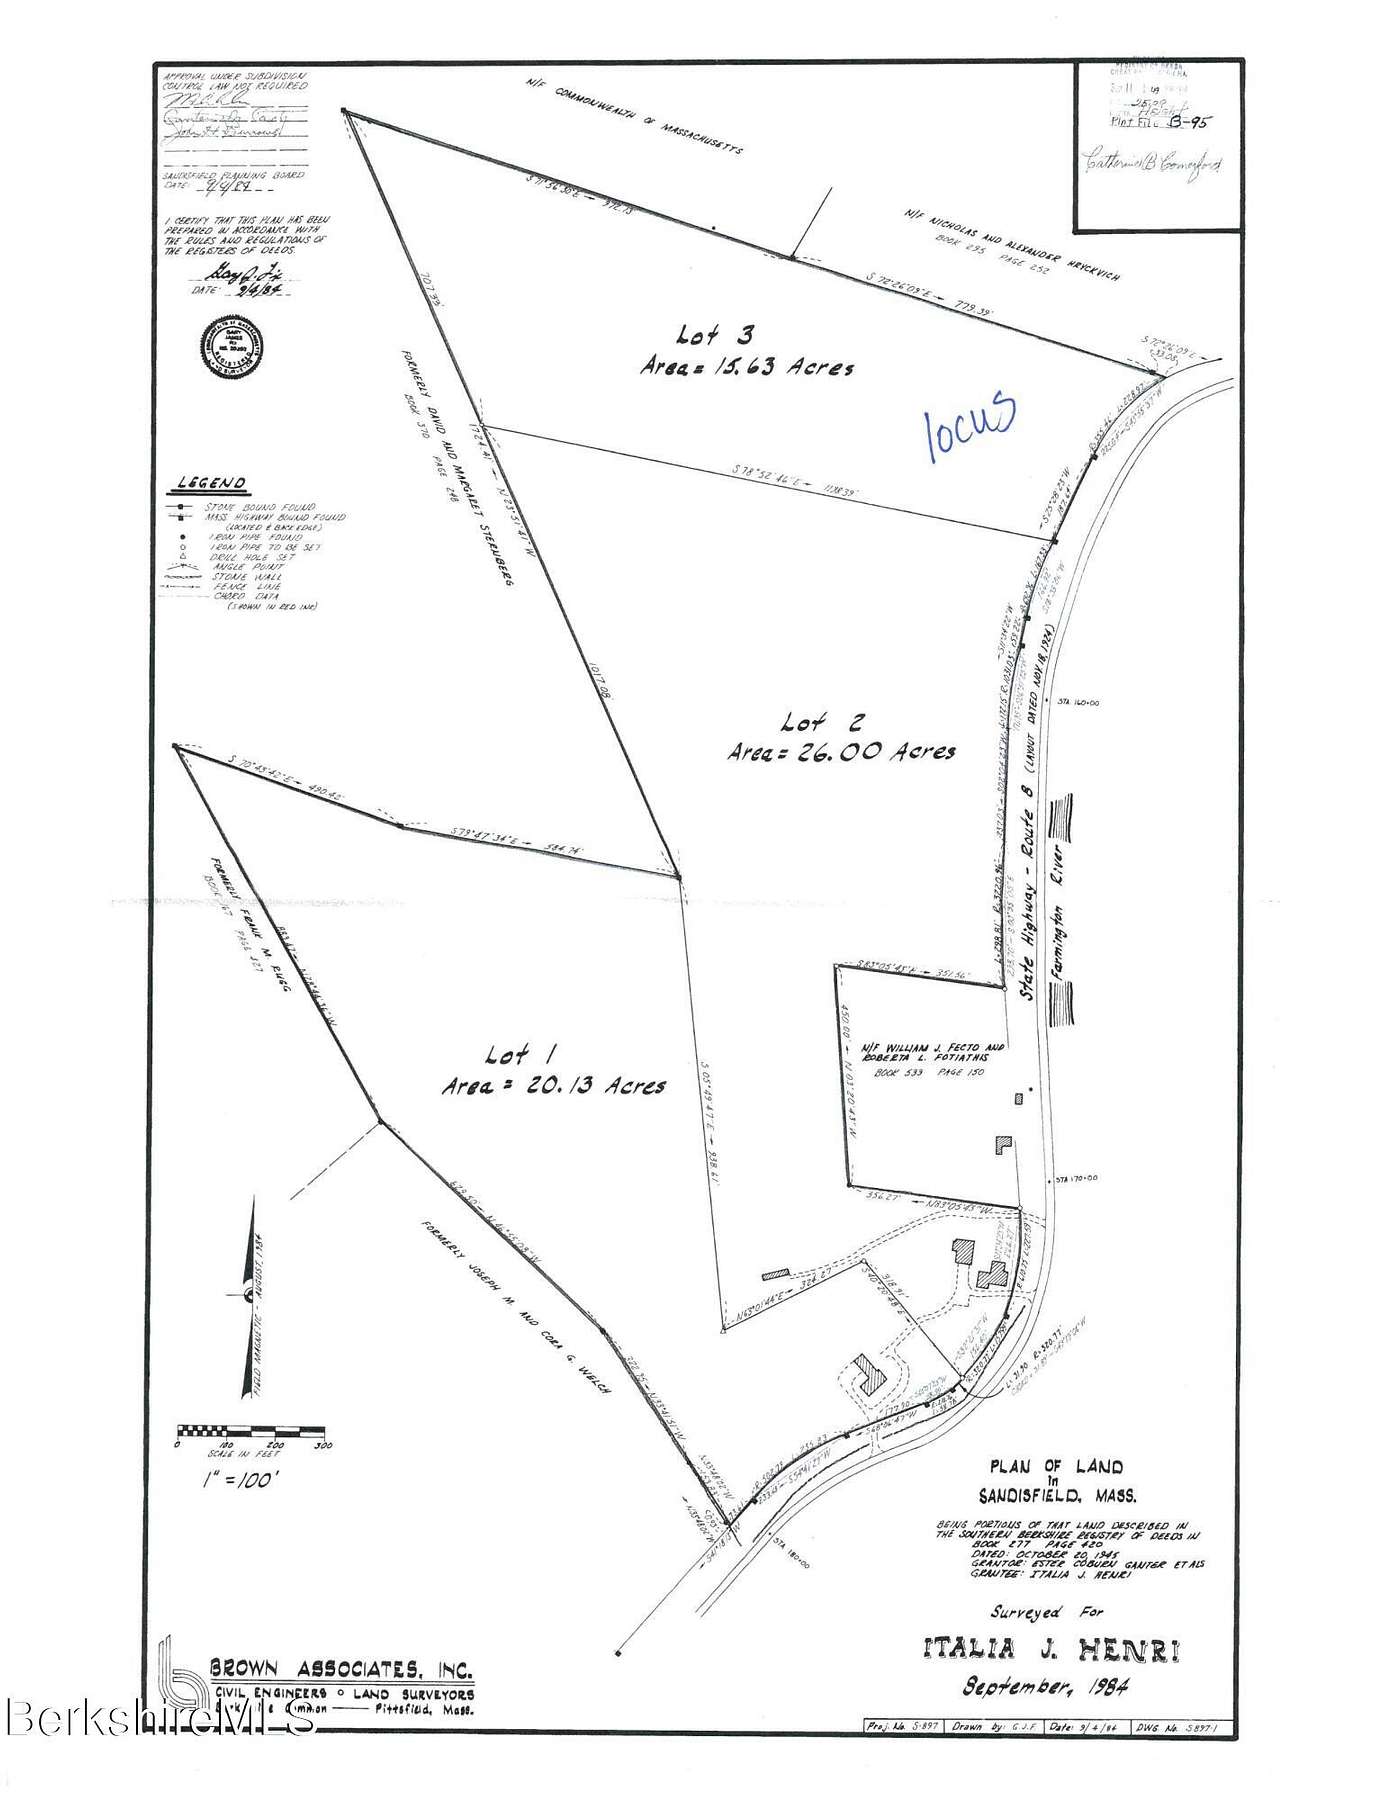 15.6 Acres of Land for Sale in Sandisfield, Massachusetts